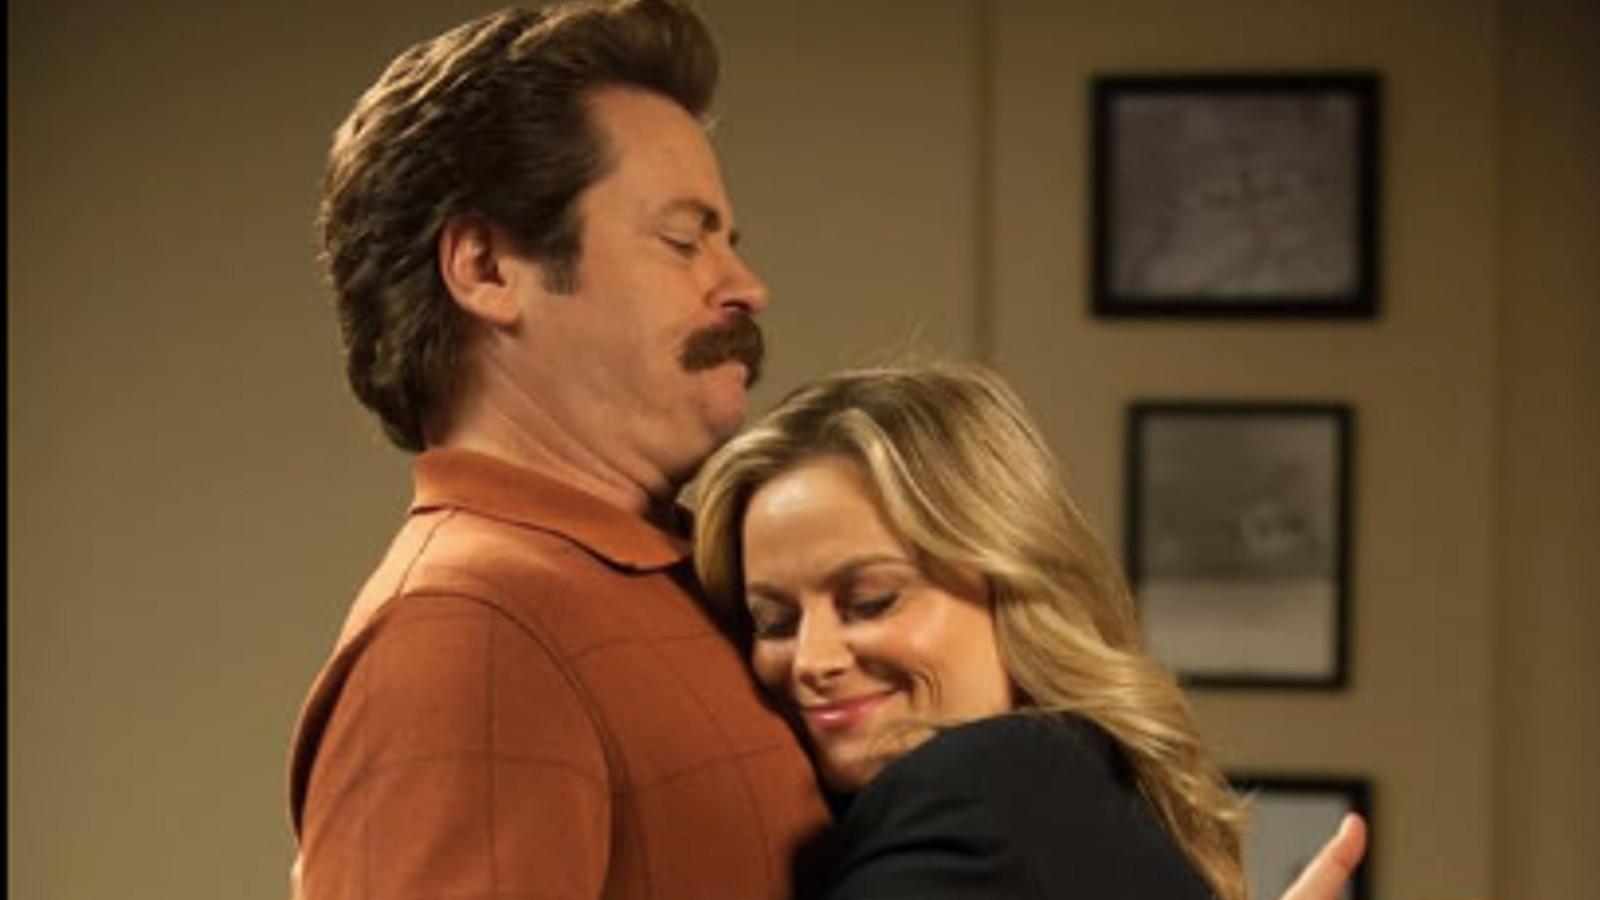 Amy Poehler and Nick Offerman in Parks and Recreation